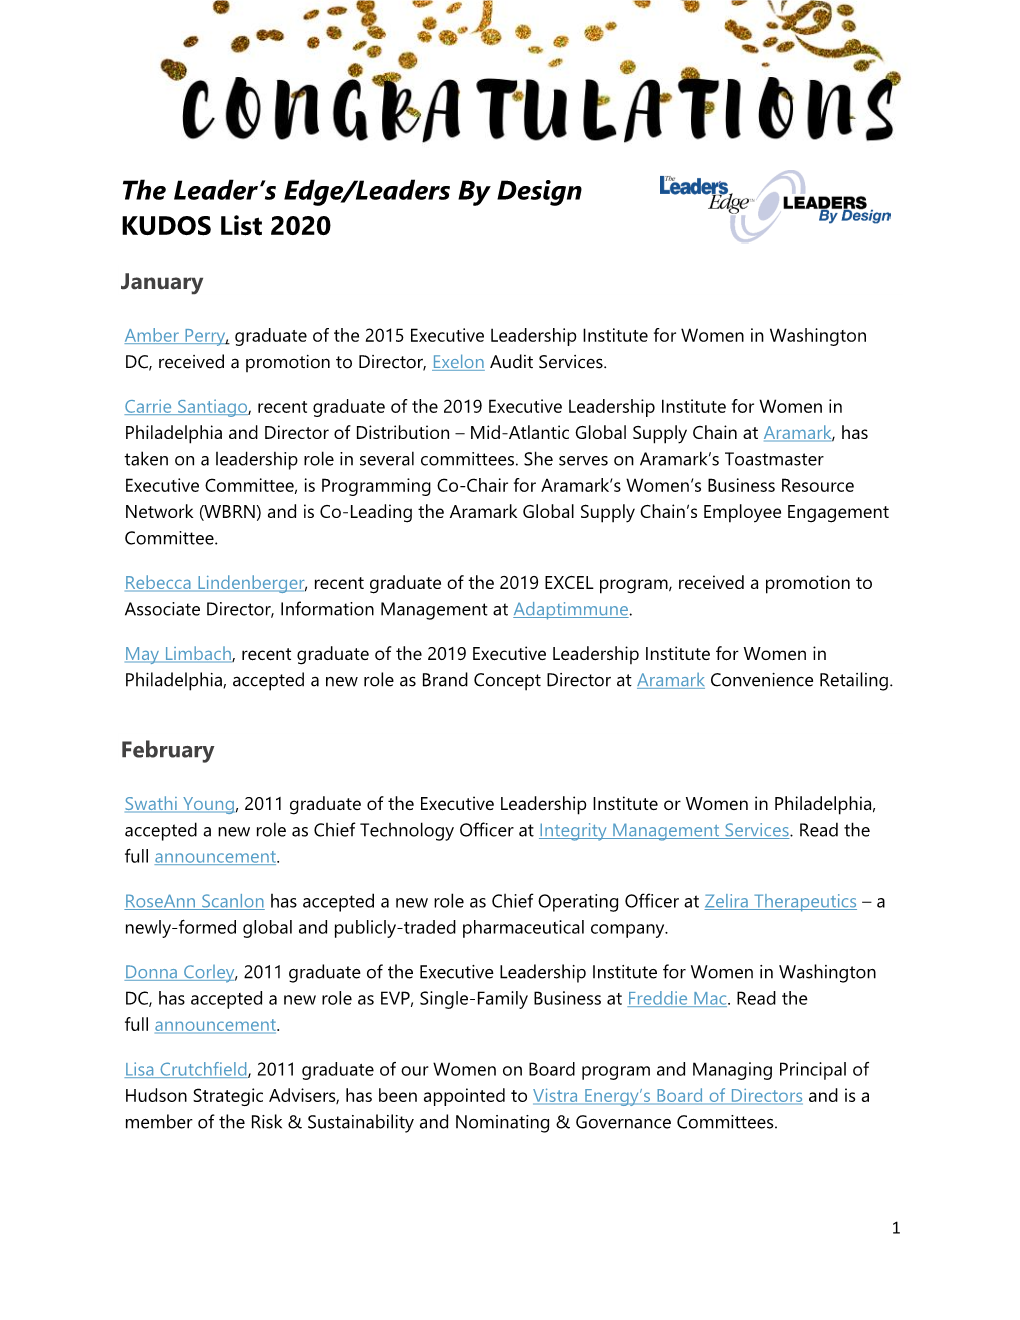 The Leader's Edge/Leaders by Design KUDOS List 2020